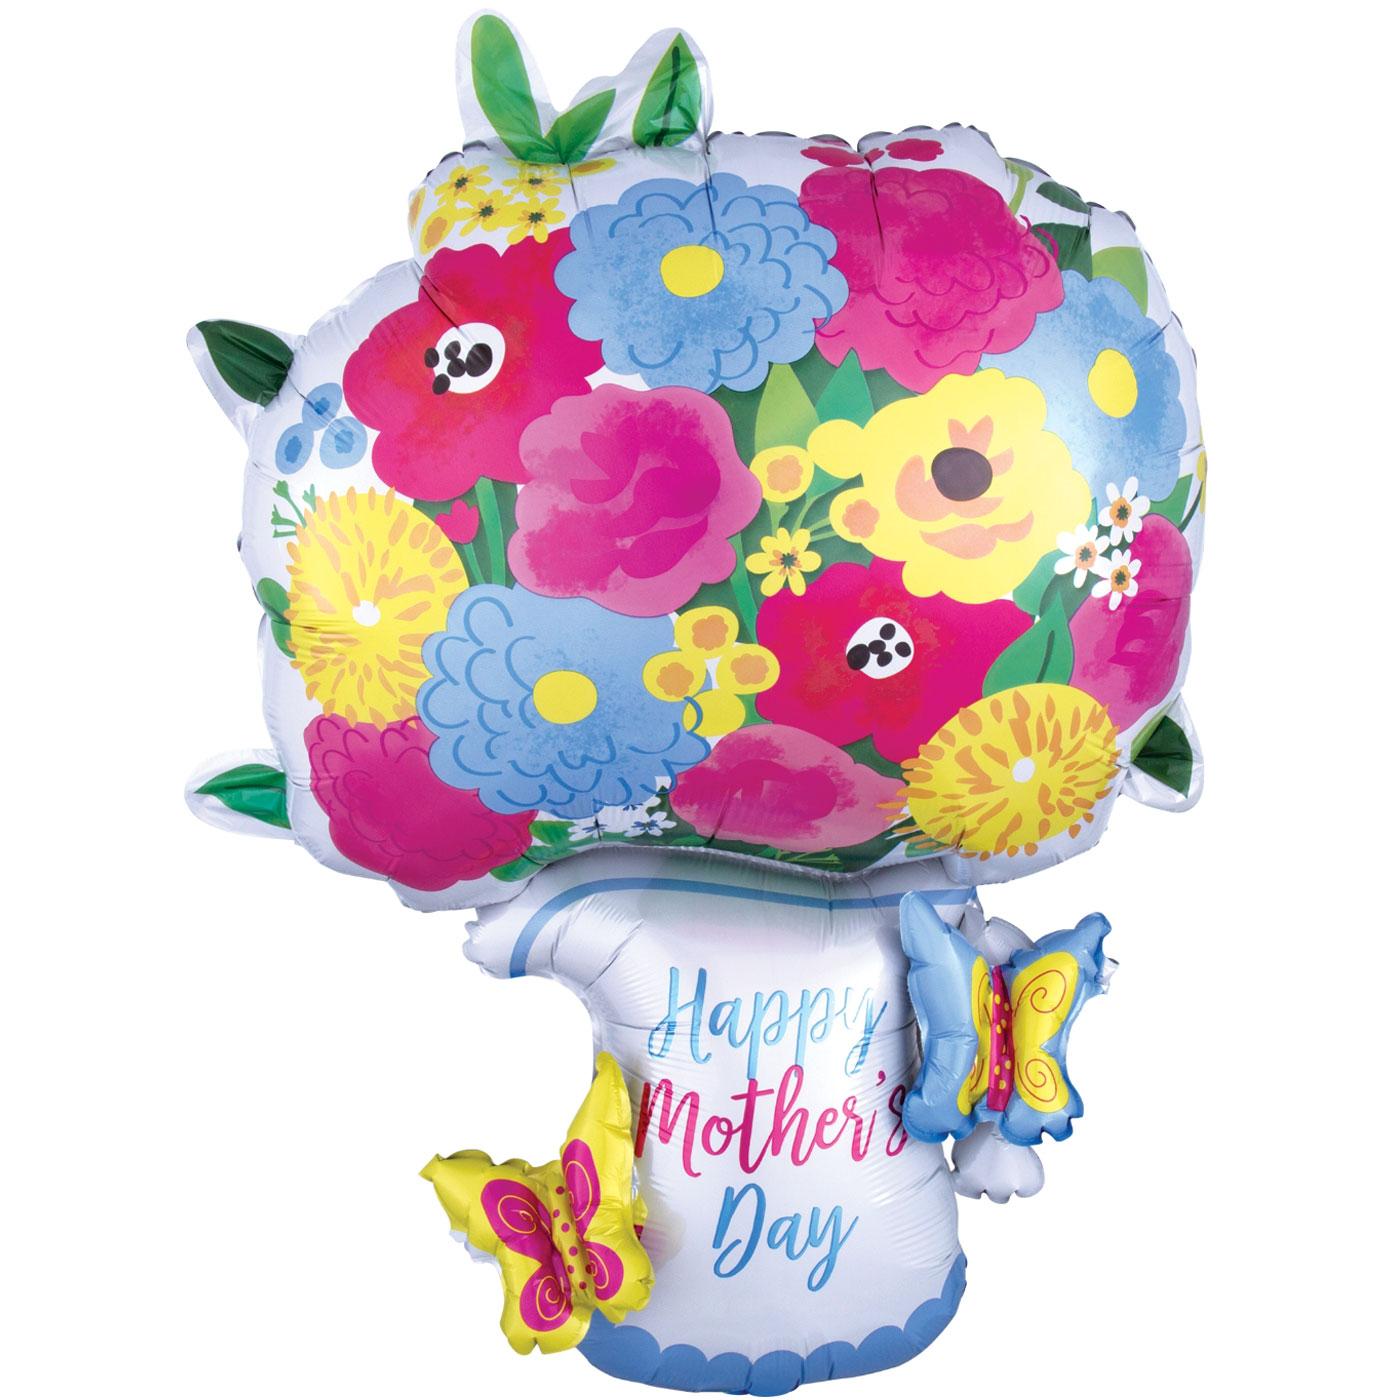 Happy Mother's Day Pitcher Garland Multi-Balloon 63x86cm Balloons & Streamers - Party Centre - Party Centre